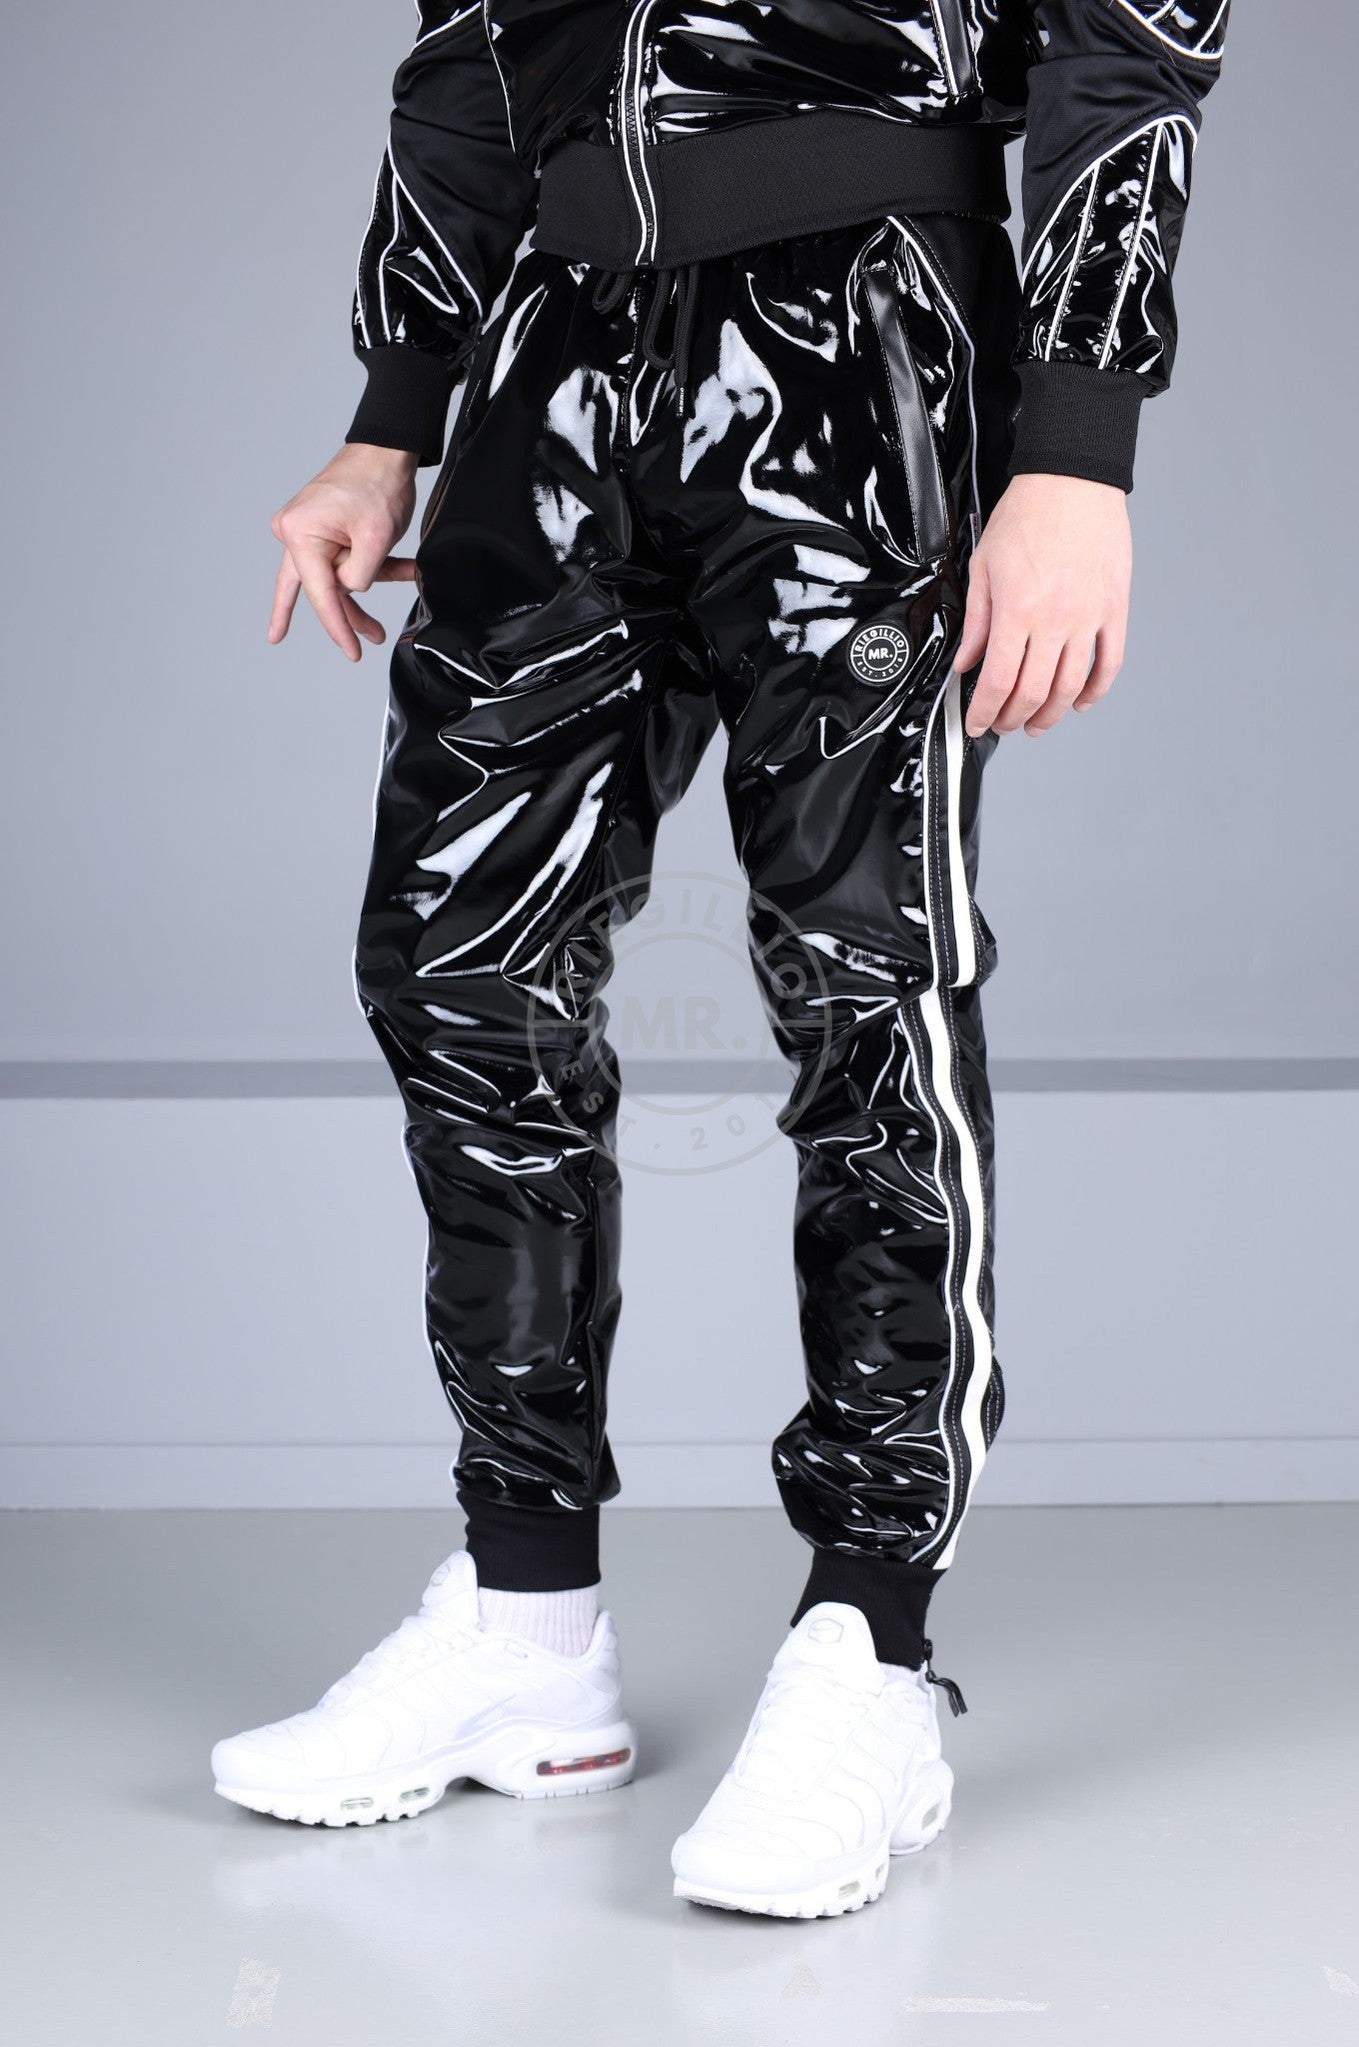 PVC 24 Tracksuit Pants - Black with White Piping-at MR. Riegillio